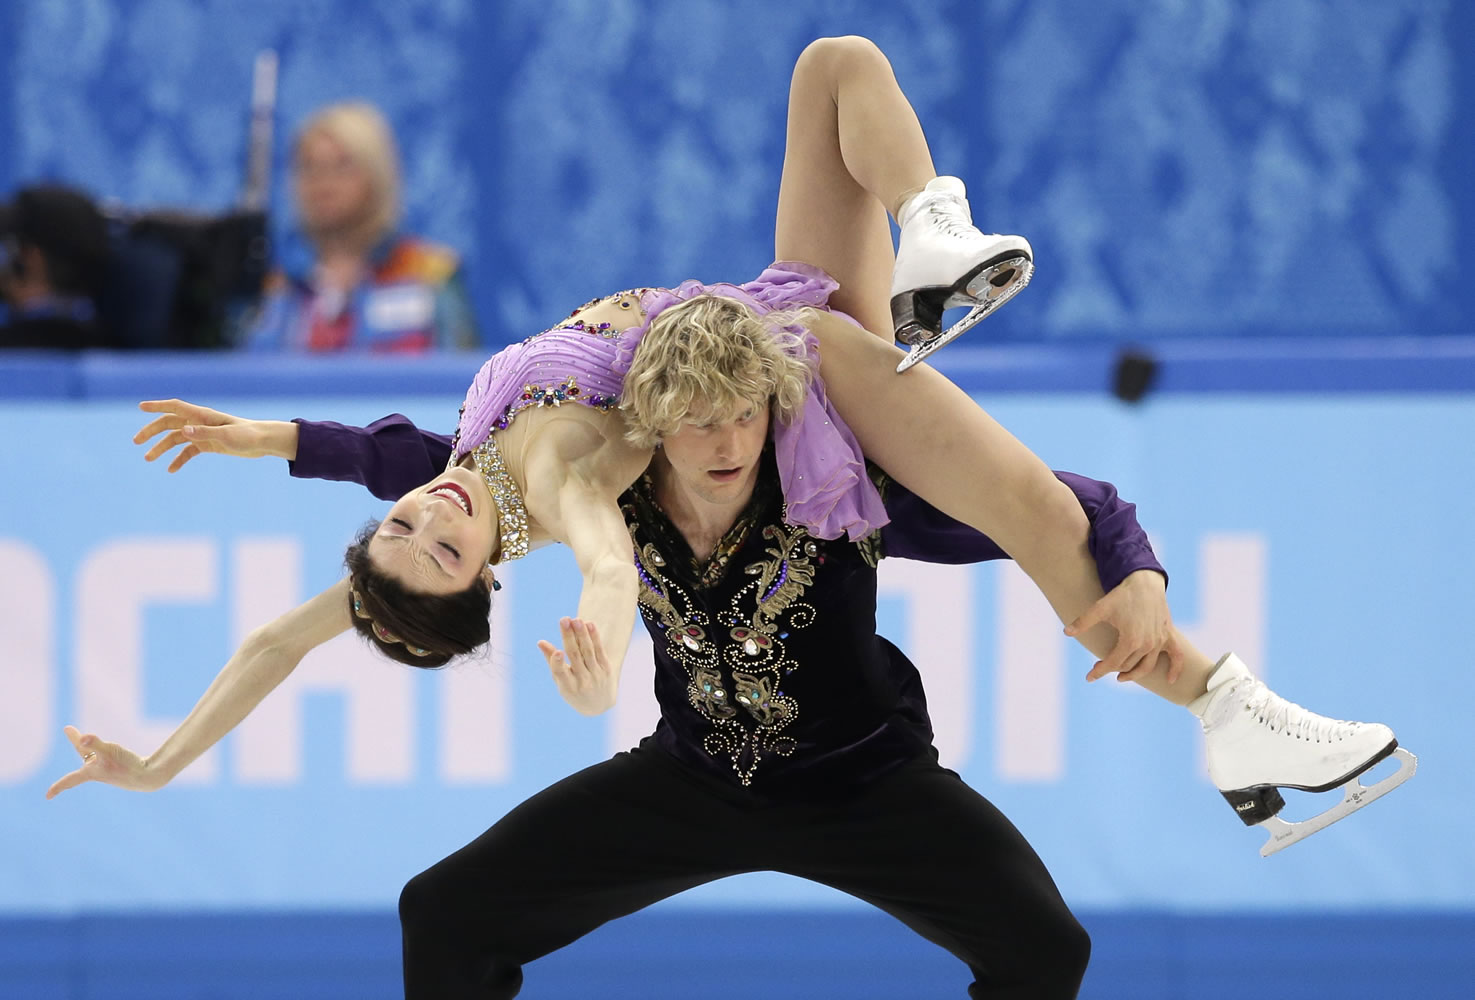 Meryl Davis and Charlie White of the United States compete in the ice dance free dance figure skating finals at the Iceberg Skating Palace during the 2014 Winter Olympics on Monday in Sochi, Russia.